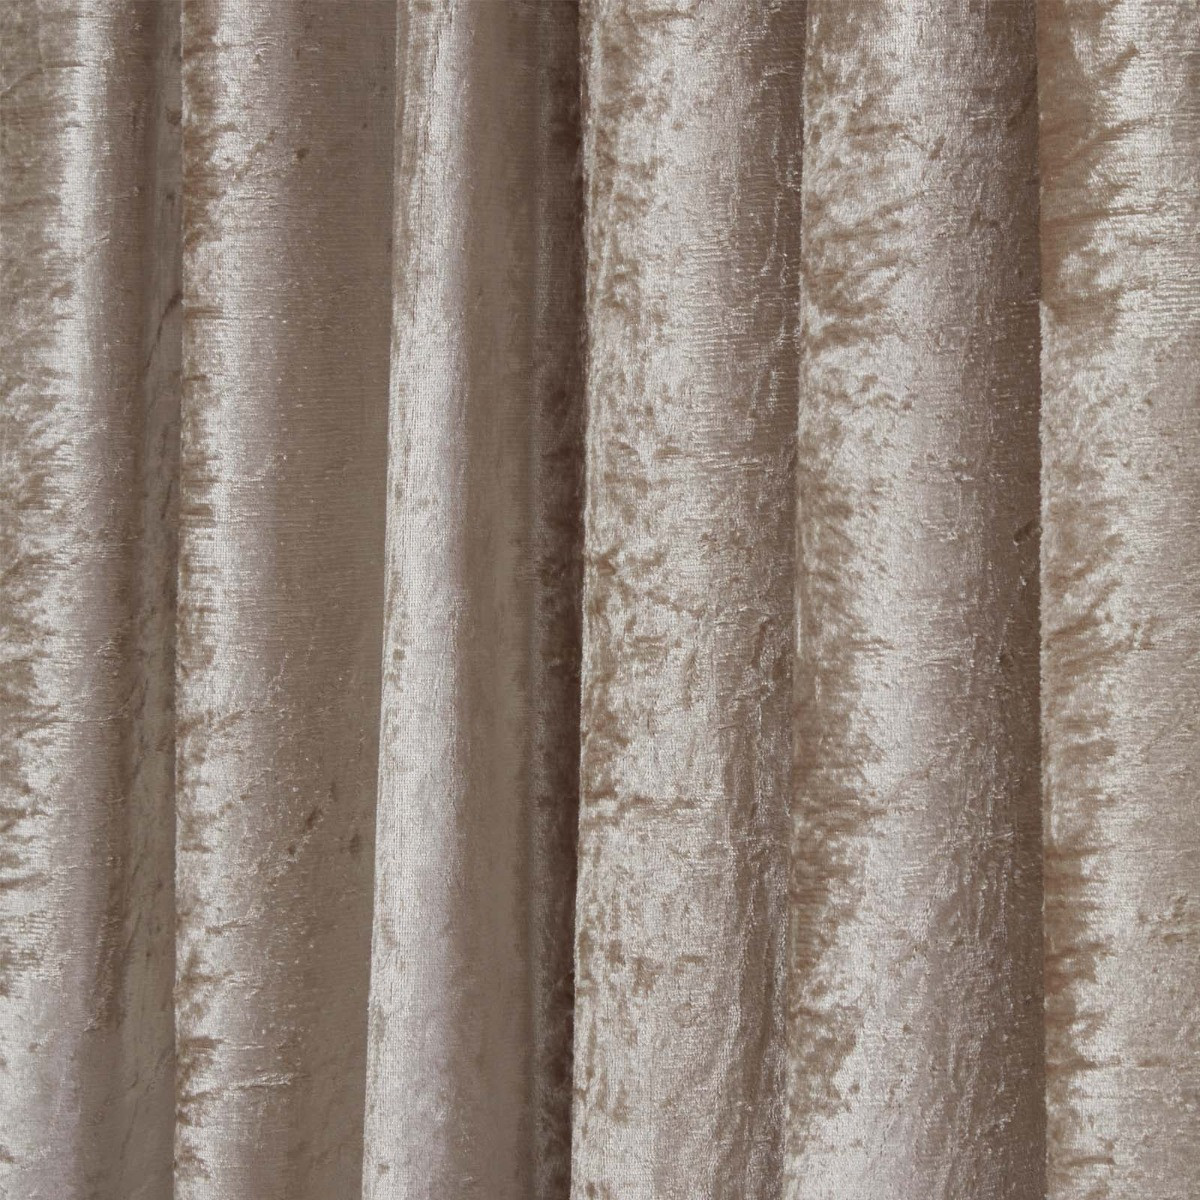 Sienna Crushed Velvet Pencil Pleat Curtains - Natural>